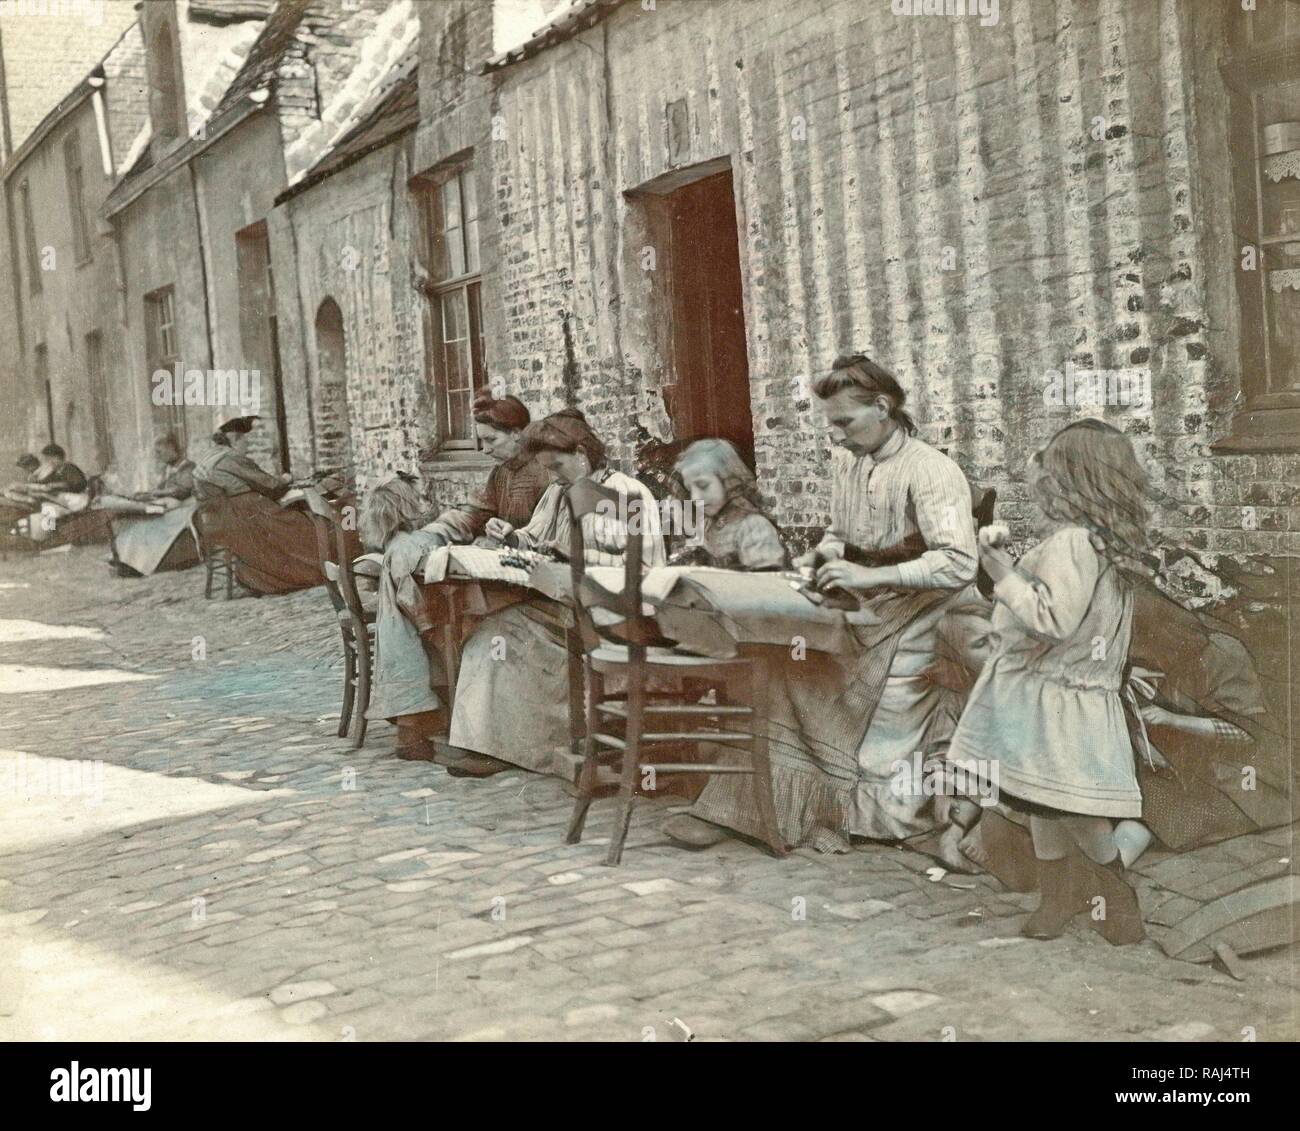 Street and women lacemaking, Anonymous, c. 1900. Reimagined by Gibon. Classic art with a modern twist reimagined Stock Photo